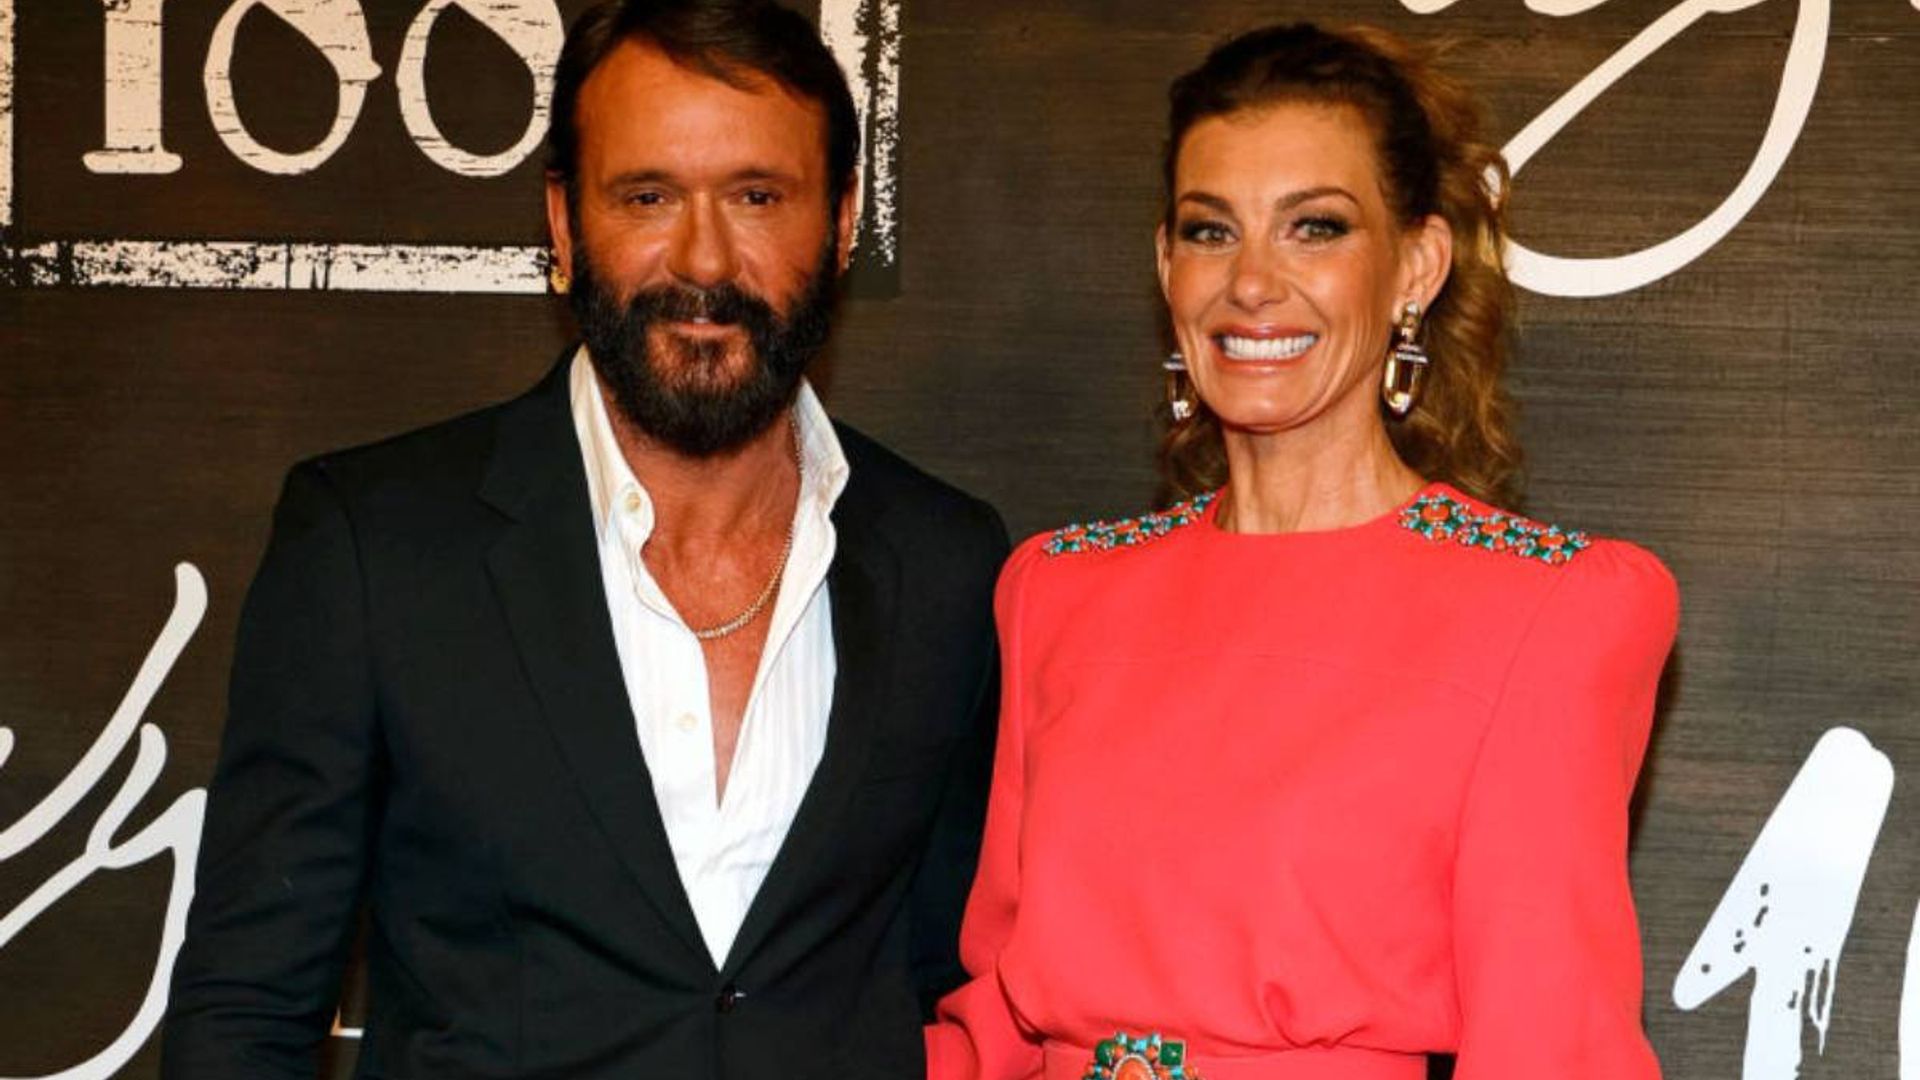 Faith Hill and Tim McGraw steal the show with very glam red carpet appearance